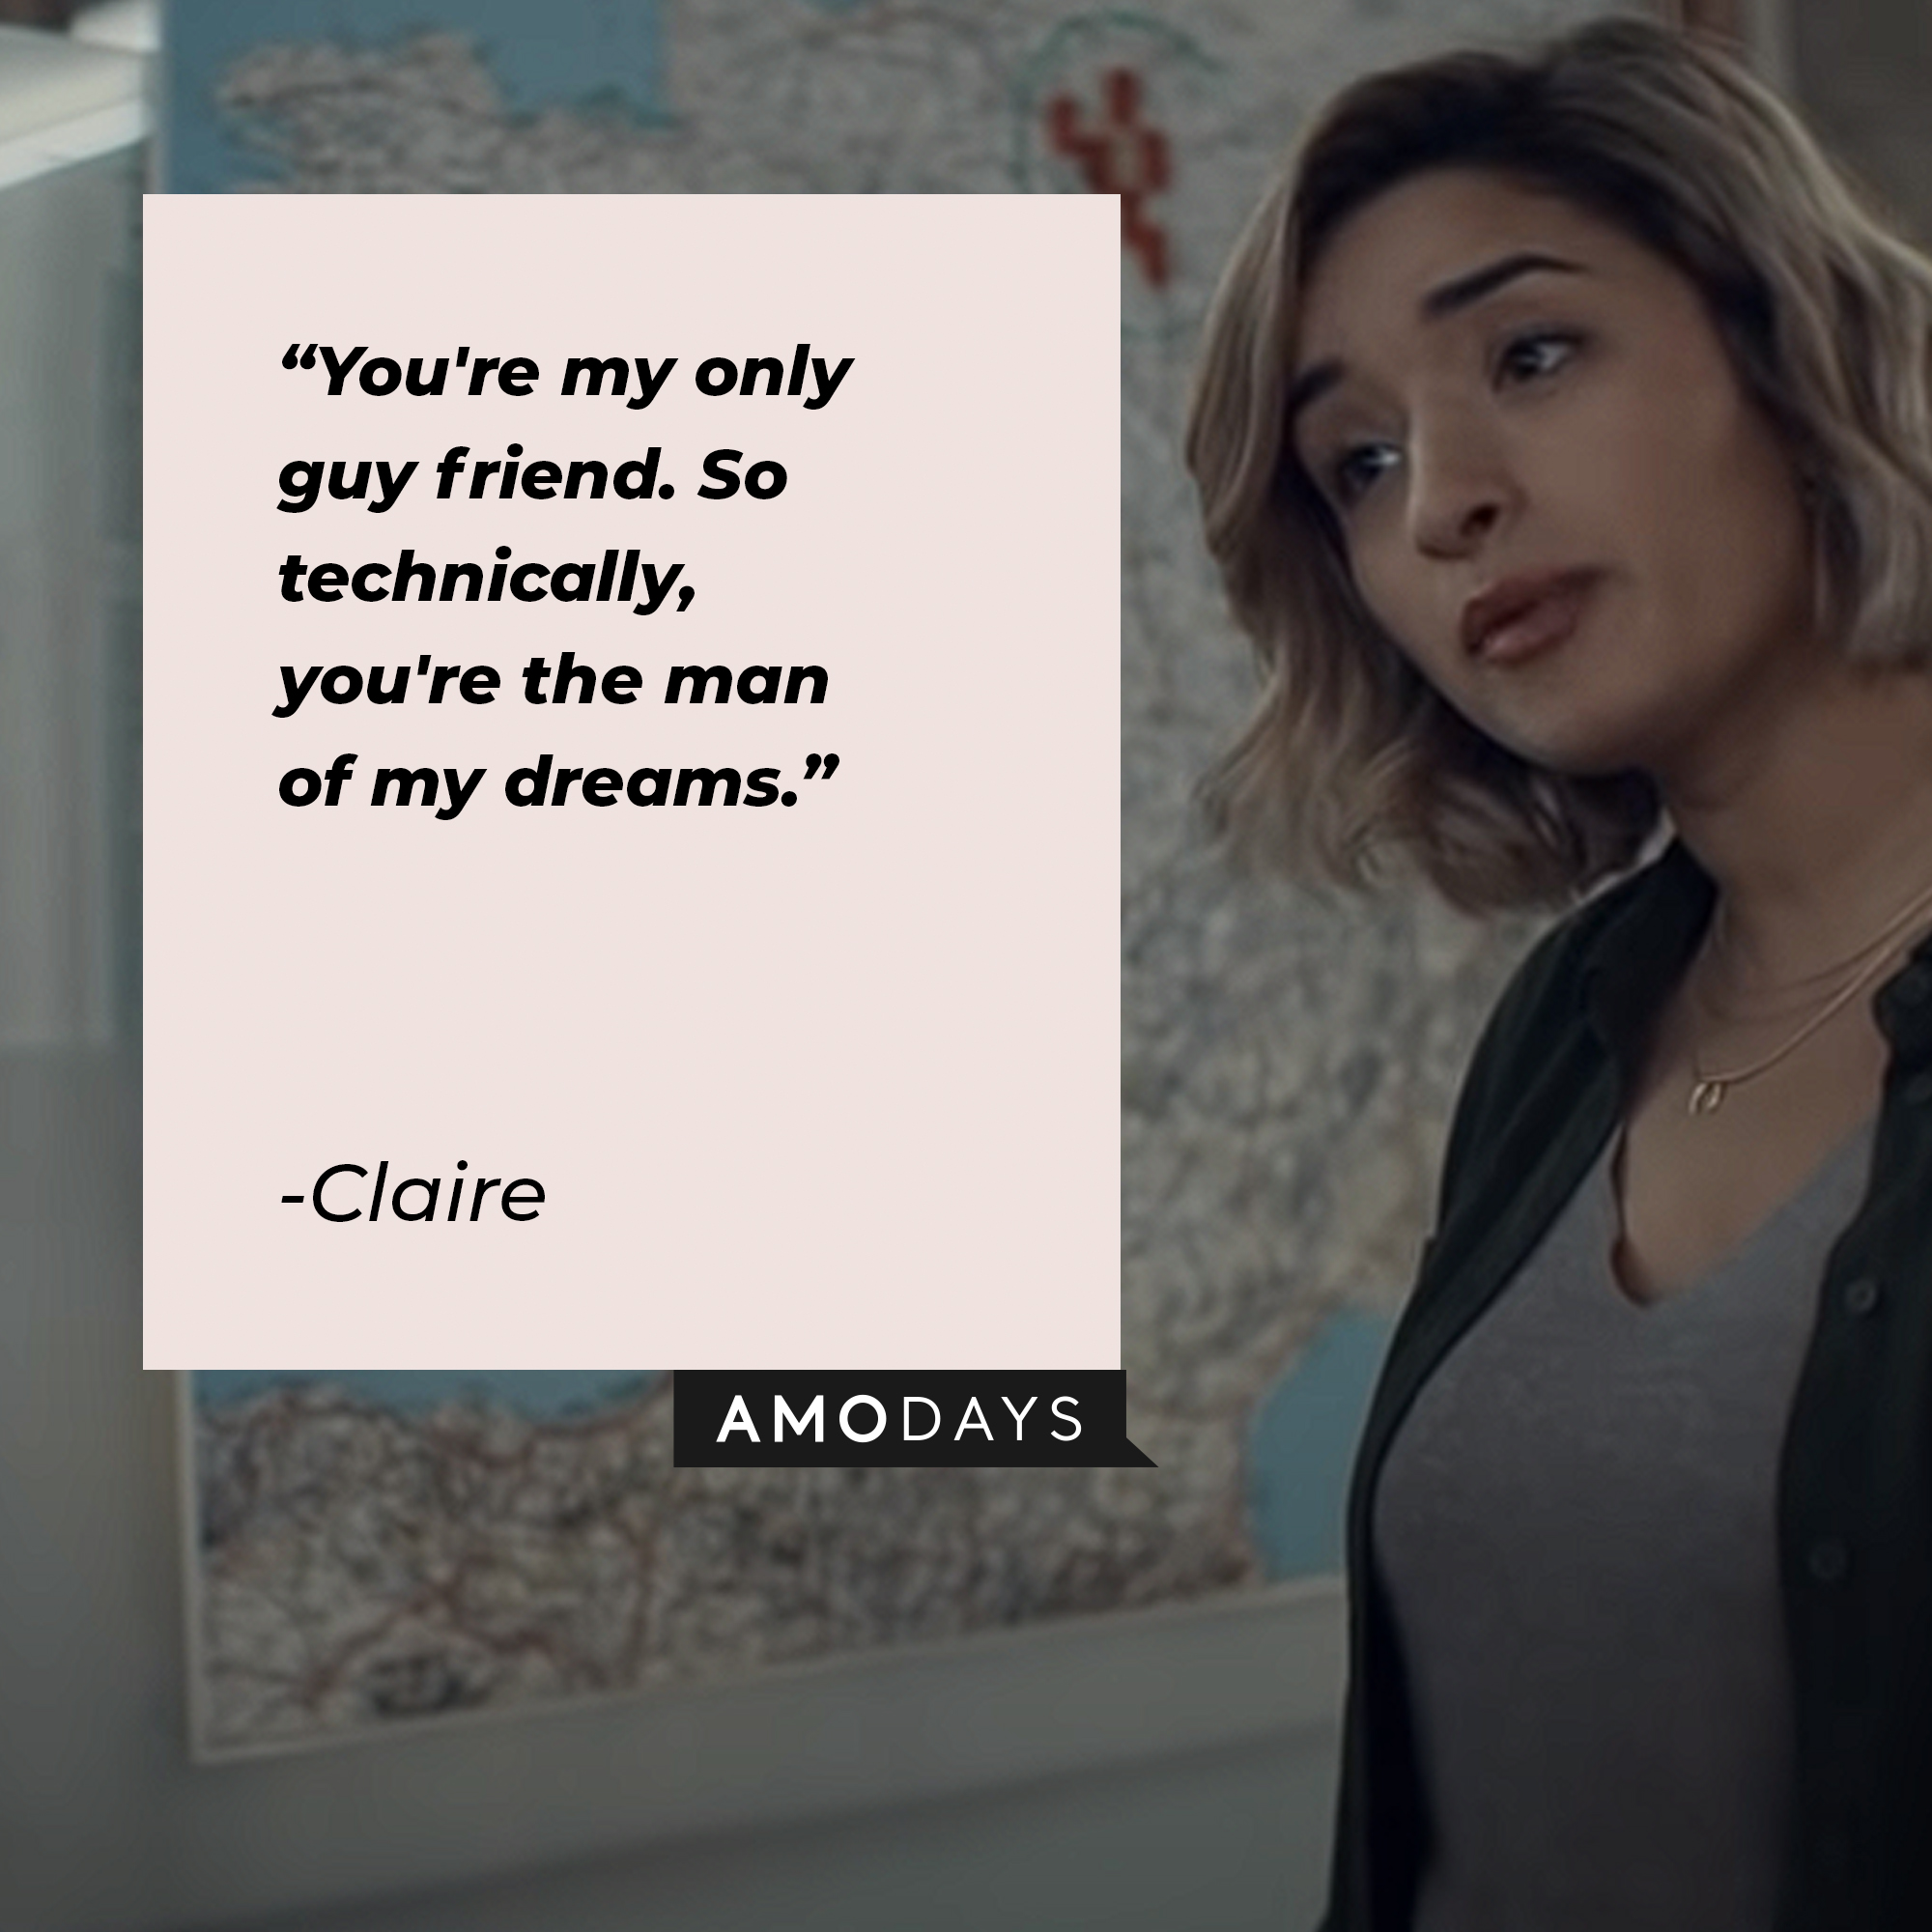 Claire's quote: "You're my only friend. So technically, you're the man of my dreams." | Image: Amodays